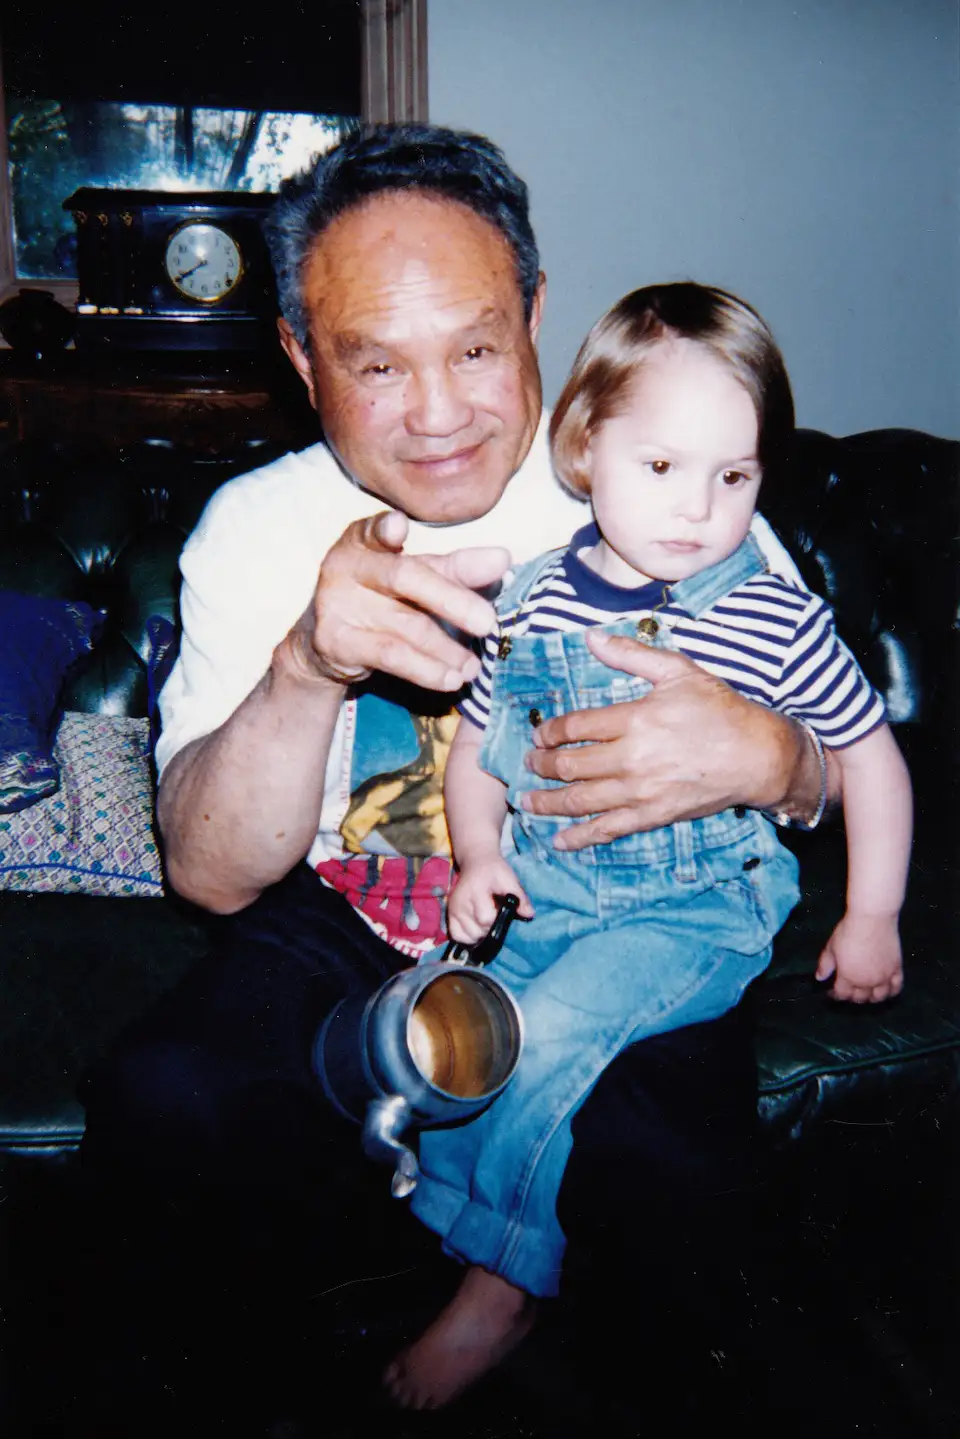 An old photo of a toddler sitting in the lap of her grandfather.